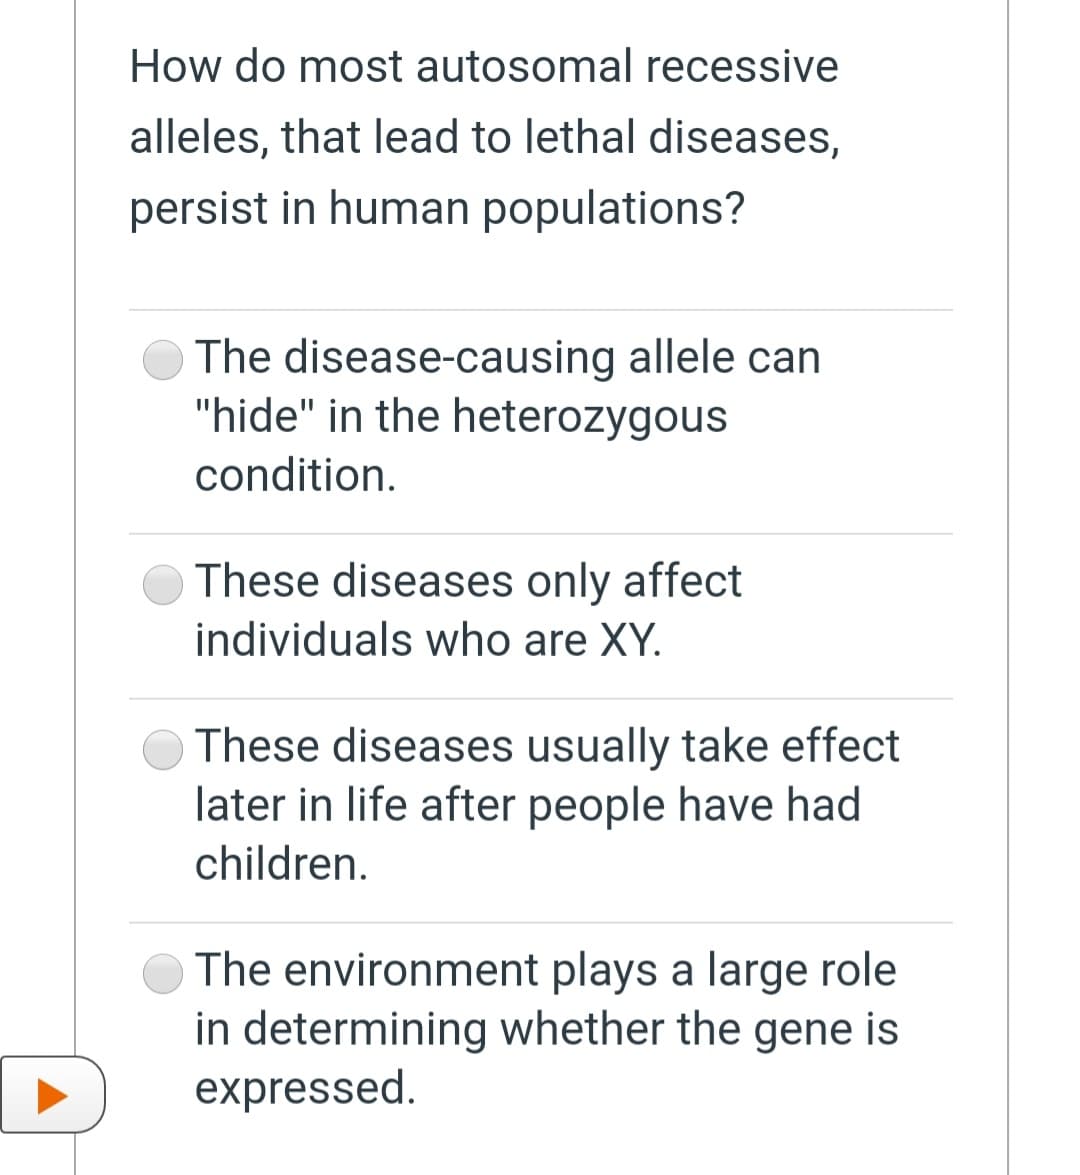 How do most autosomal recessive
alleles, that lead to lethal diseases,
persist in human populations?
The disease-causing allele can
"hide" in the heterozygous
condition.
These diseases only affect
individuals who are XY.
These diseases usually take effect
later in life after people have had
children.
The environment plays a large role
in determining whether the gene is
expressed.
D
